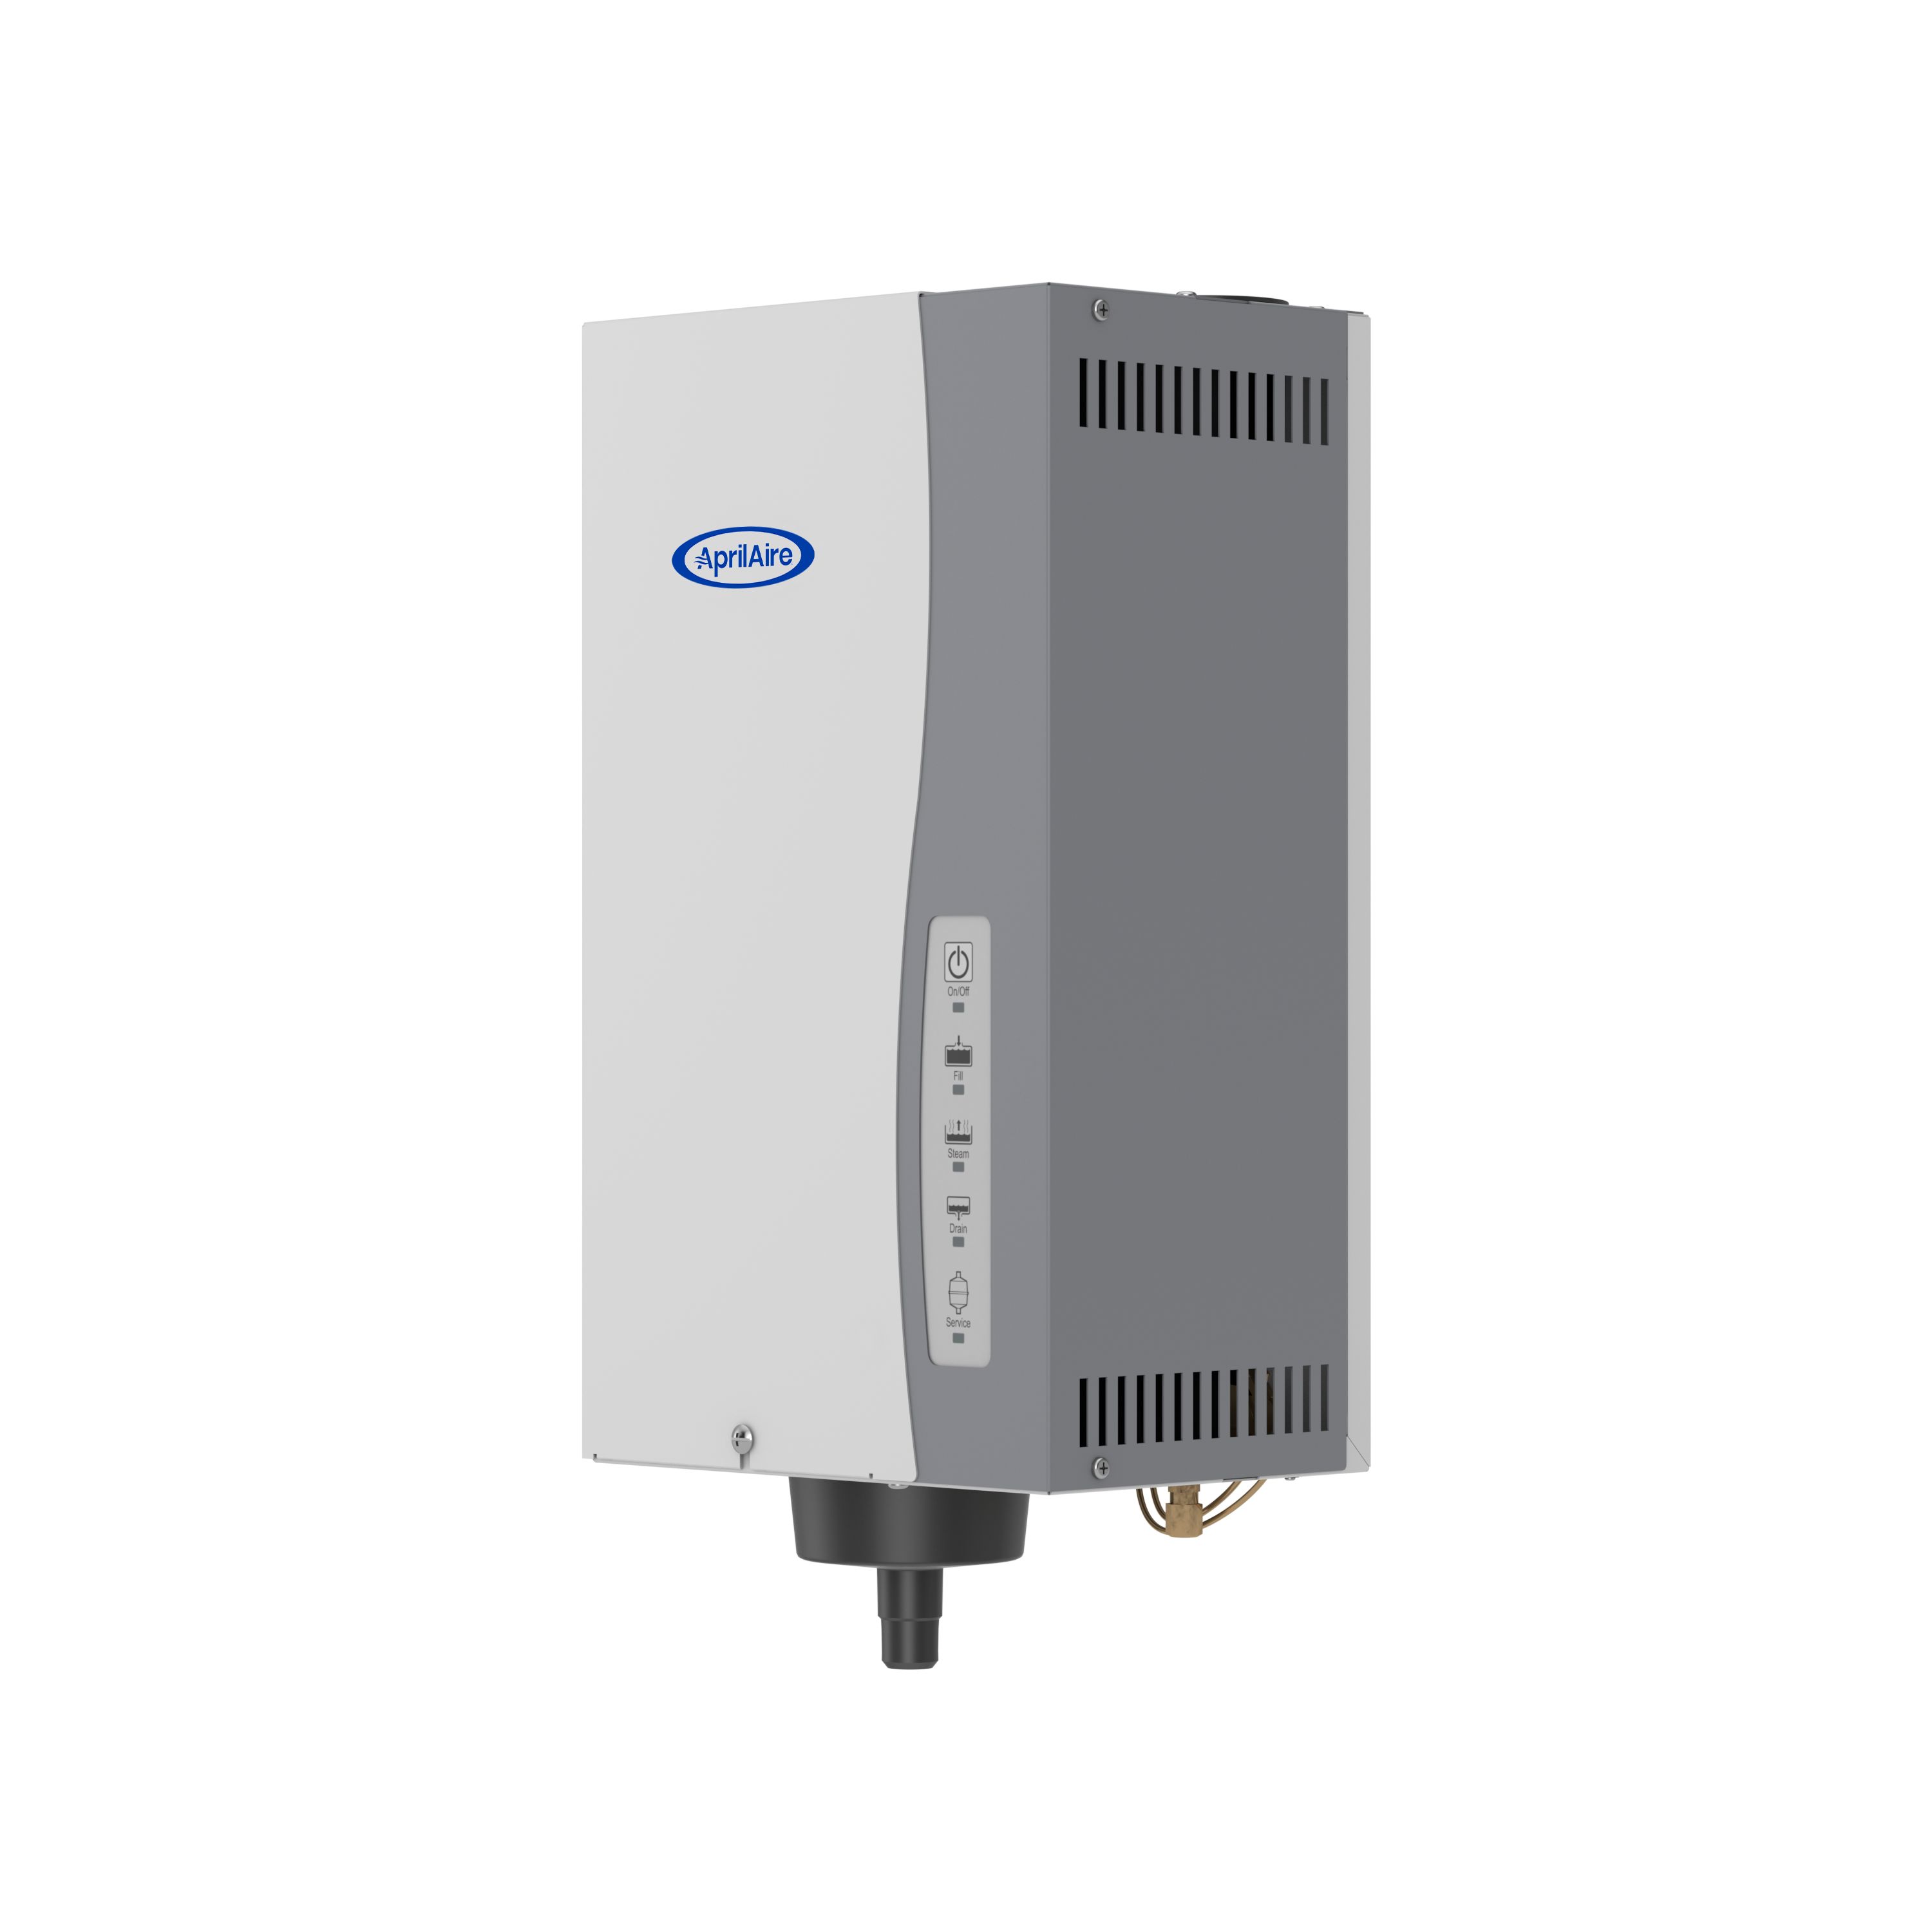 800 APRILAIRE STEAM HUMIDIFIER